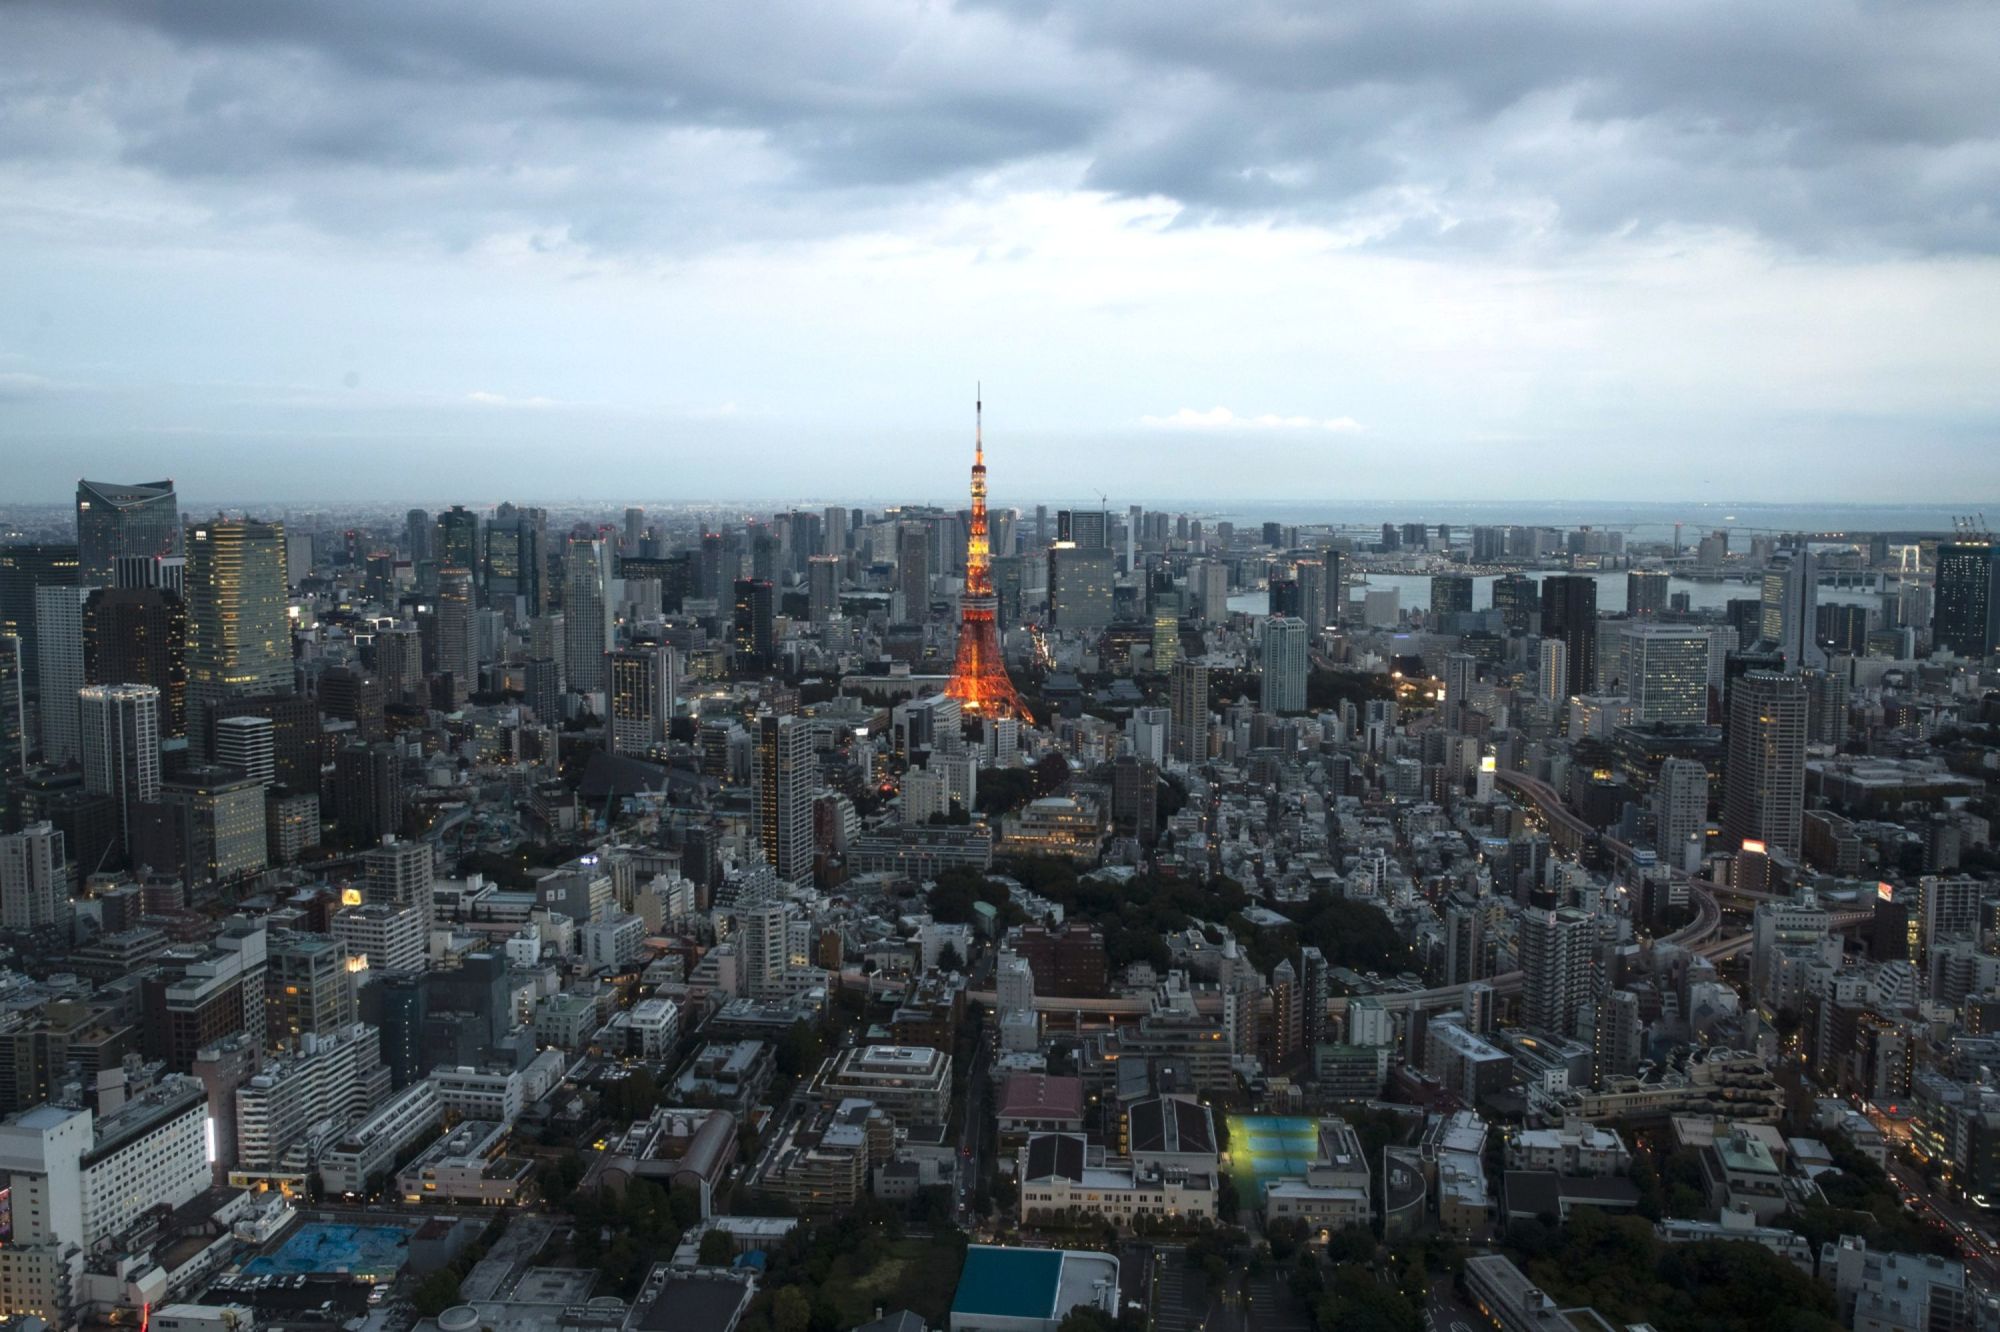 The Tokyo Metropolitan Government aims to achieve net-zero carbon dioxide emissions by 2050, according to a blueprint of its strategy unveiled on Friday. | BLOOMBERG